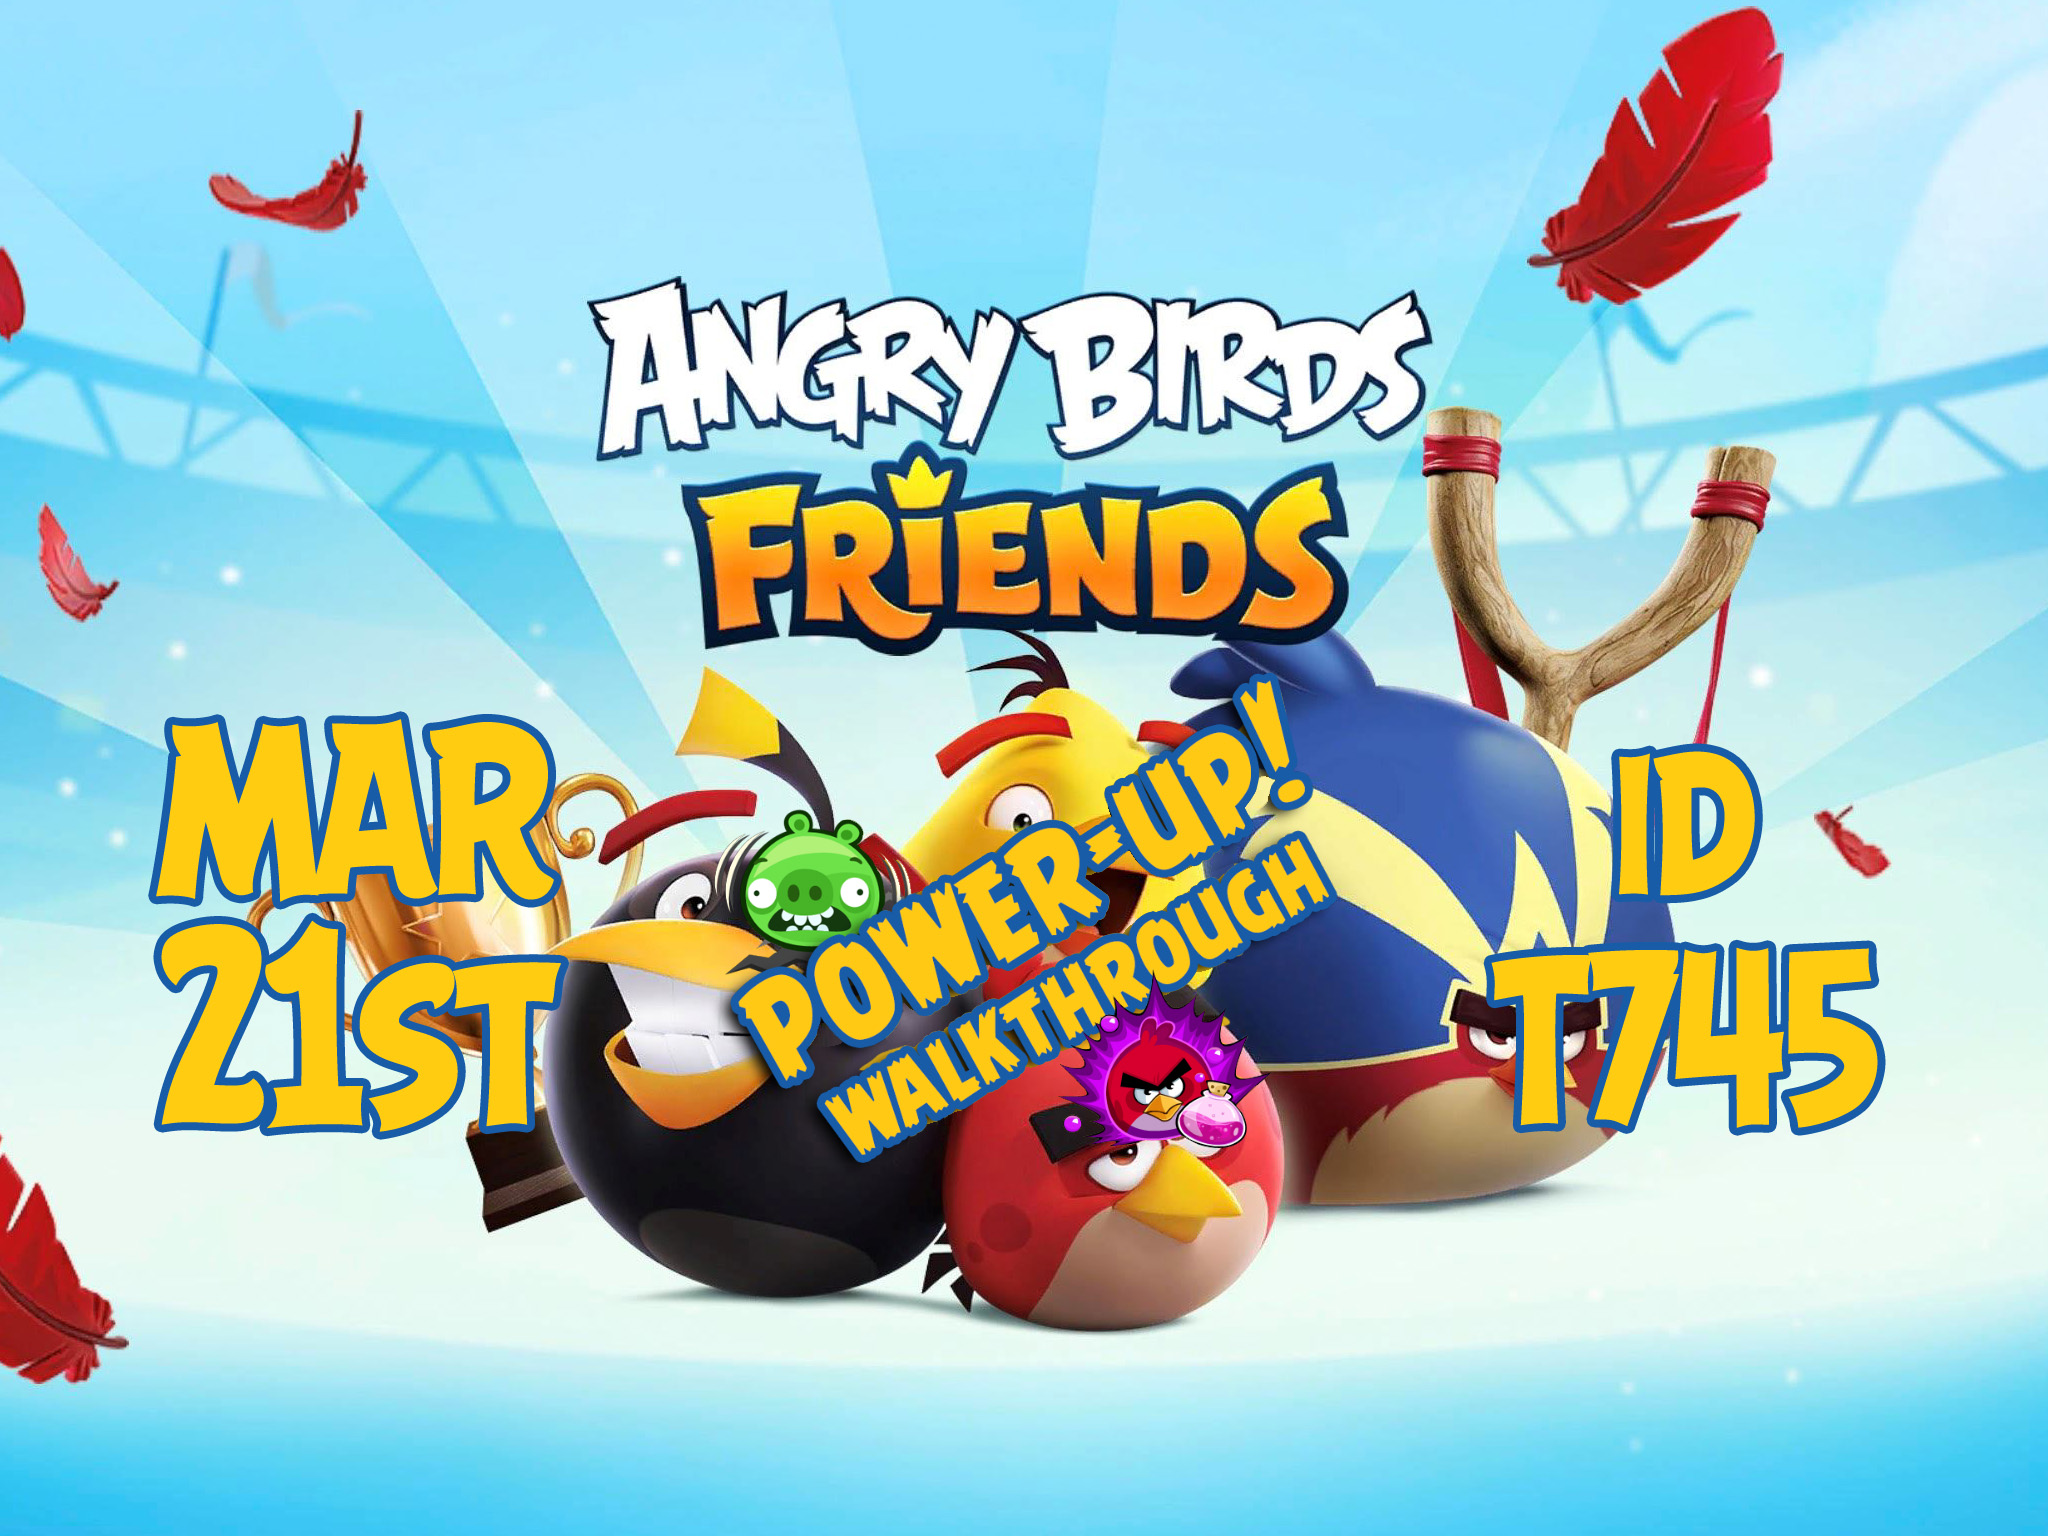 Angry-Birds-Friends-Tournament-T745-Feature-Image-PU